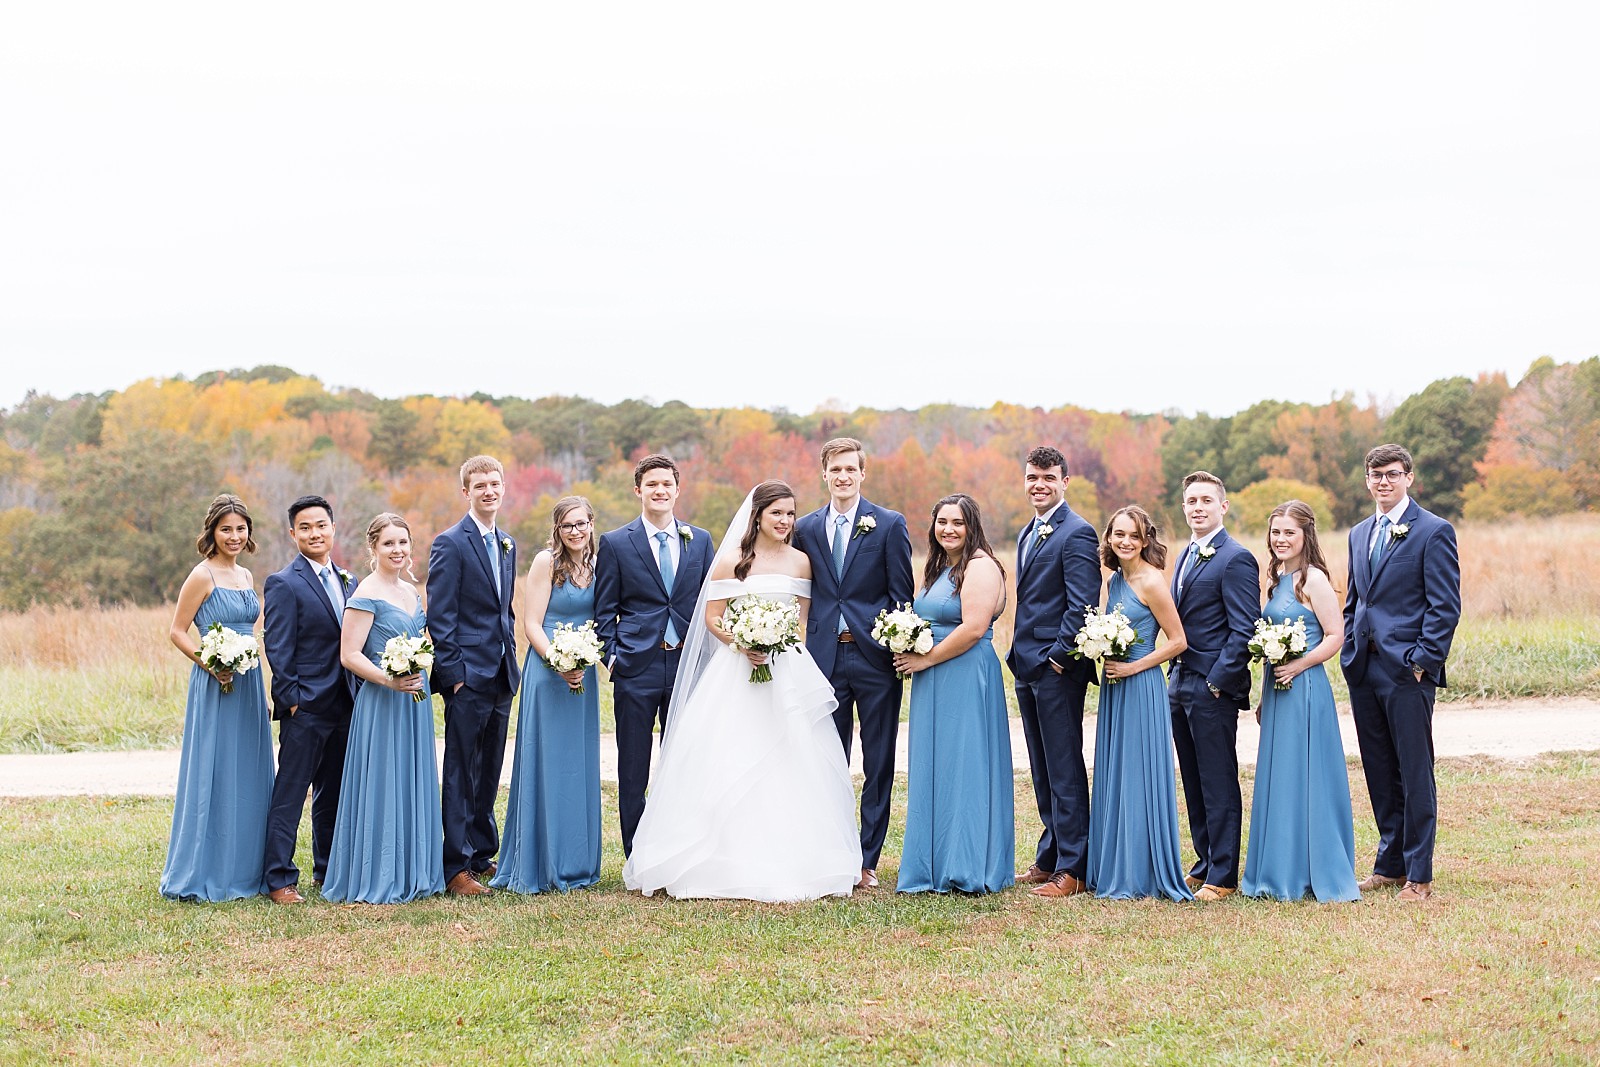 Wedding party attire inspiration | Fall Wedding at The Meadows in Raleigh | Raleigh NC Wedding Photographer